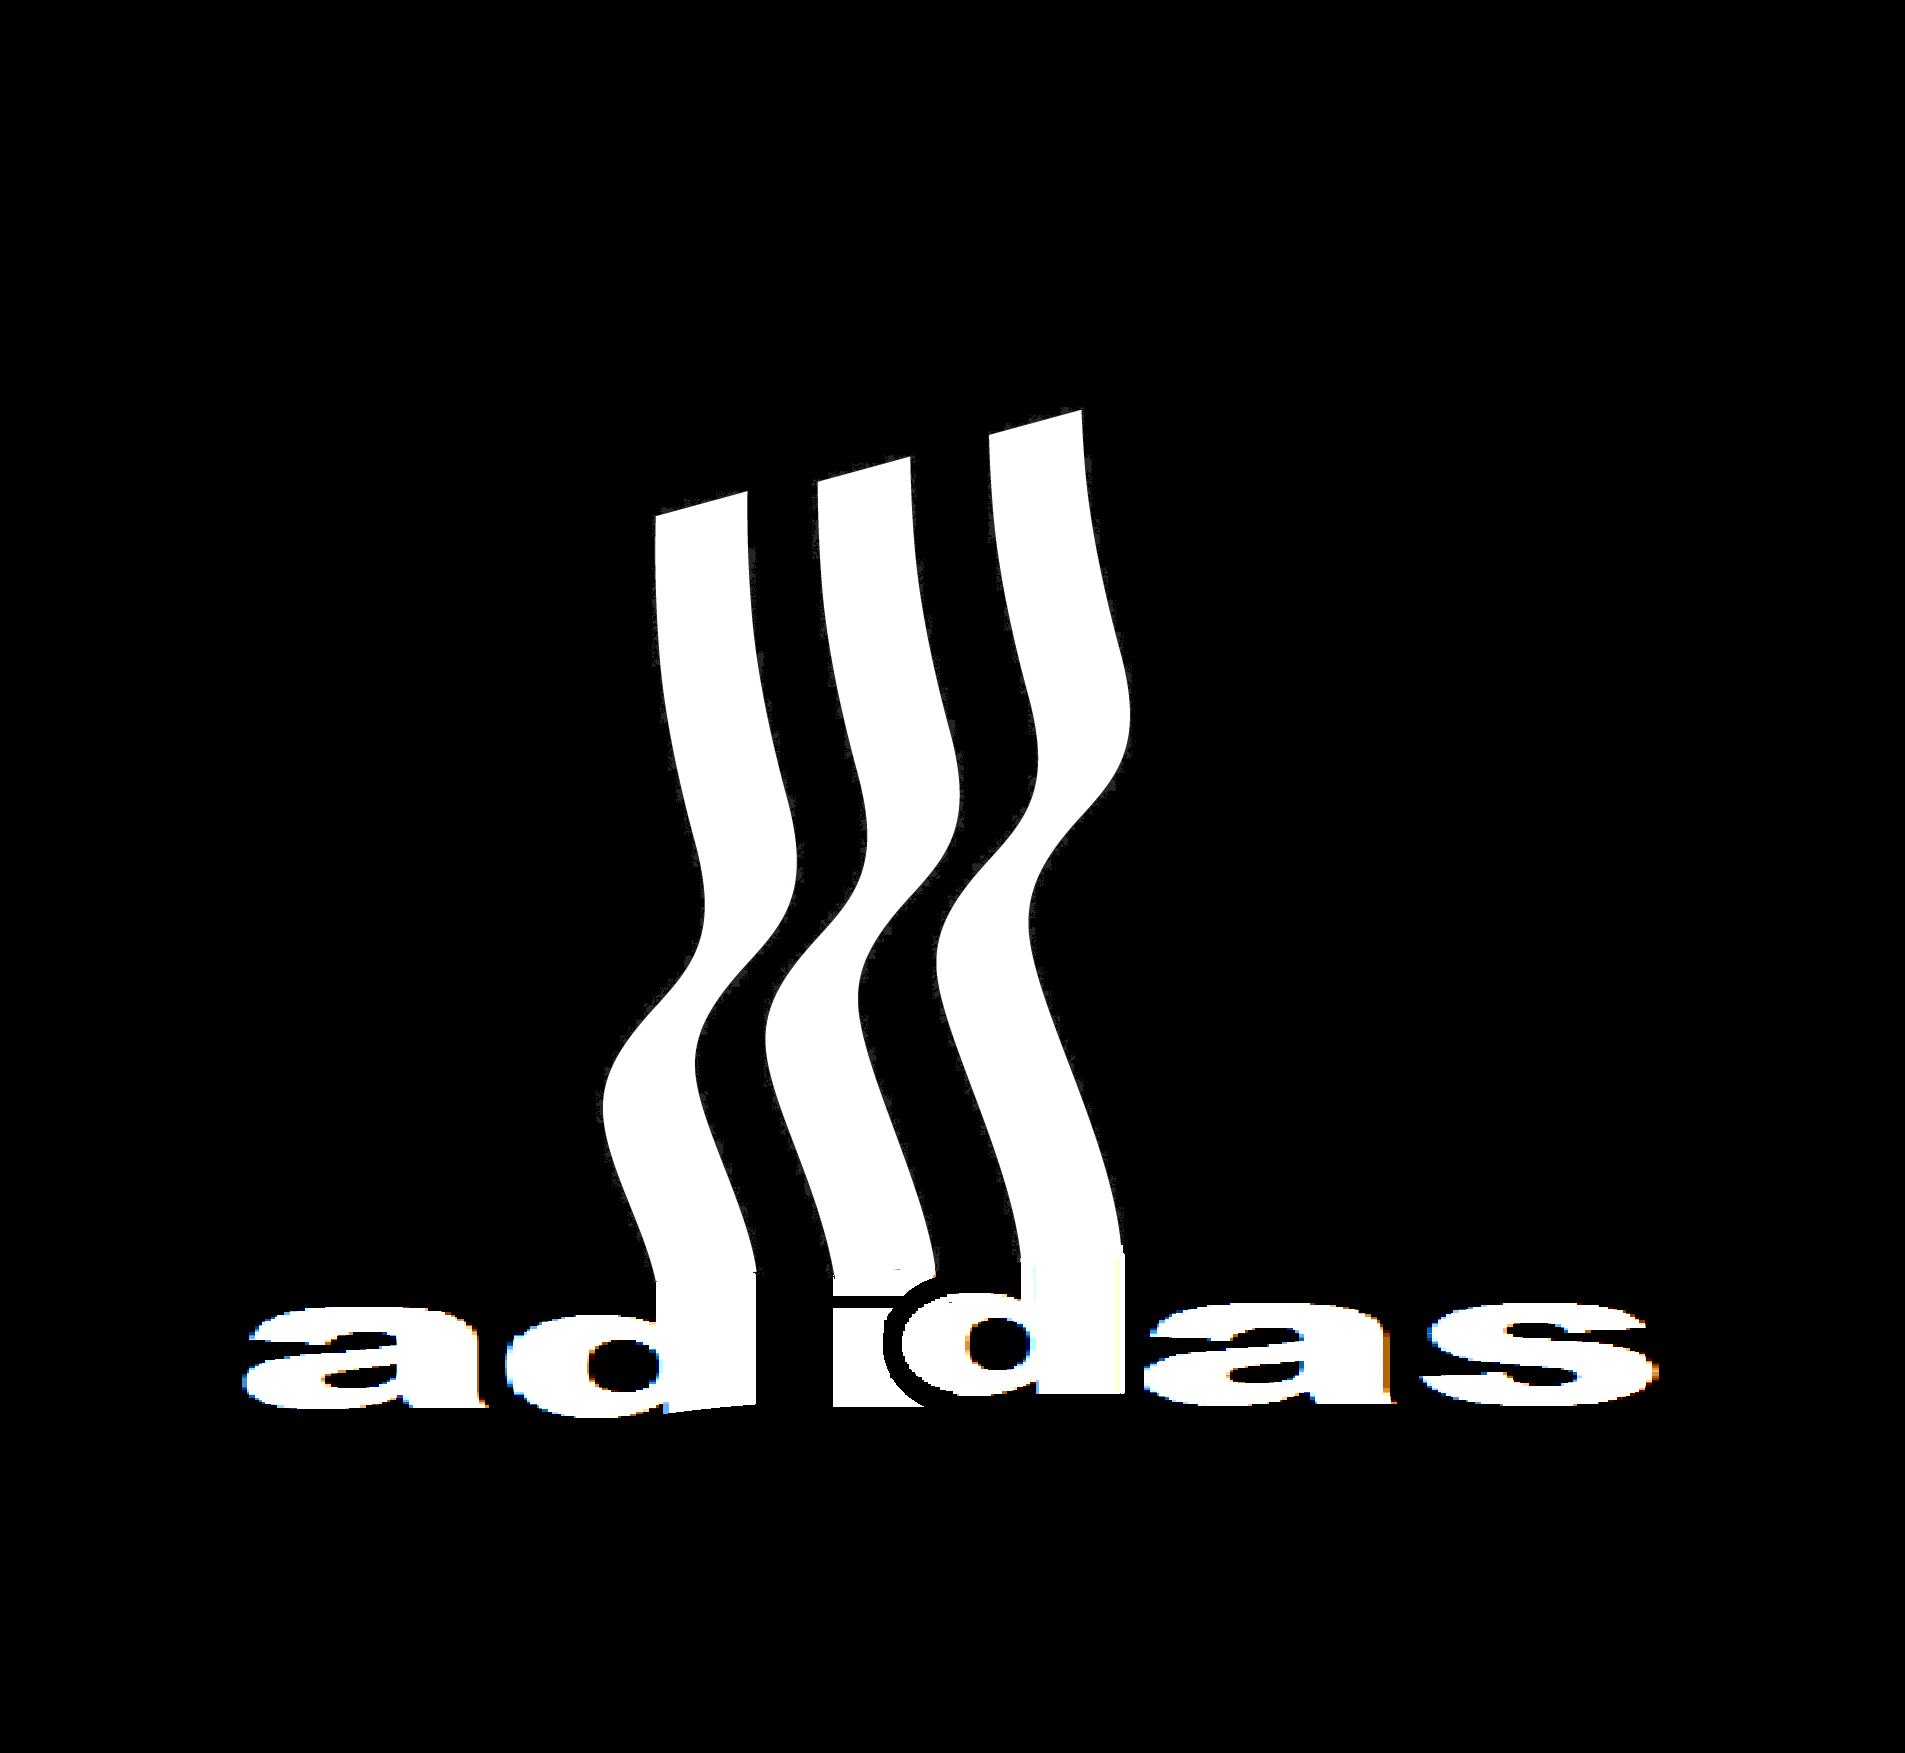 New Fresh Free Download Funny And Adidas Logo Desktop Background 4k